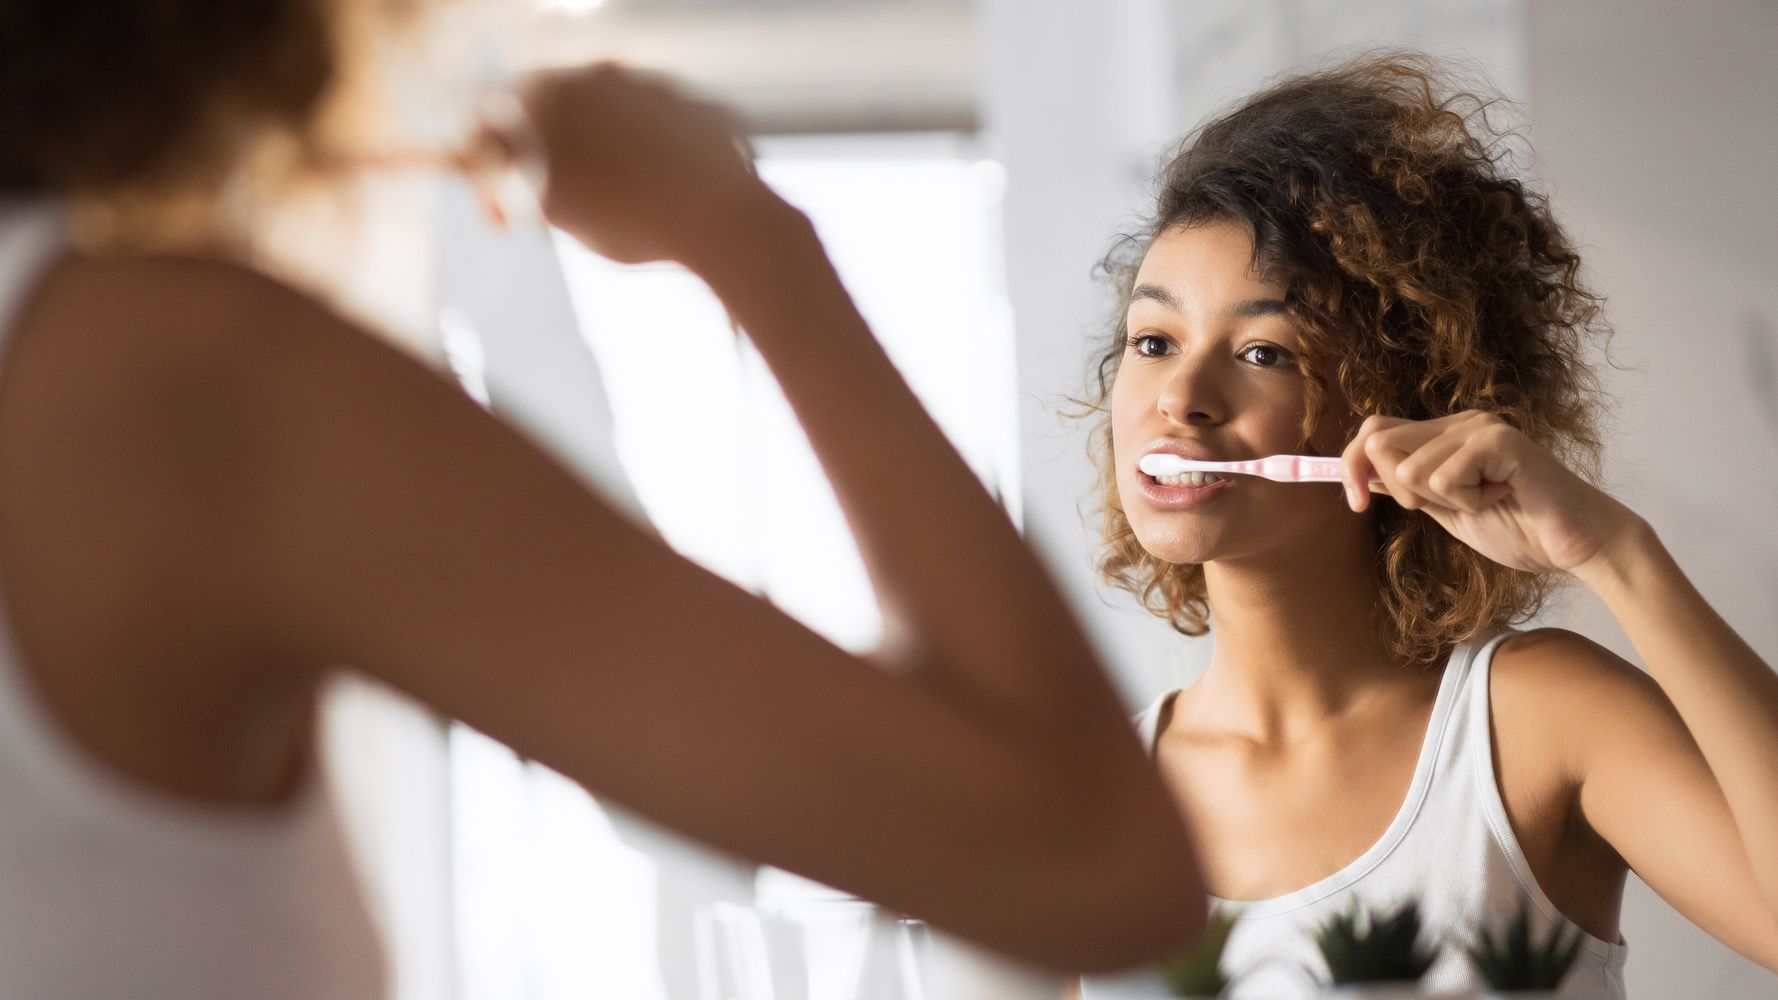 Should You Brush Your Teeth Before Or After Drinking Coffee?